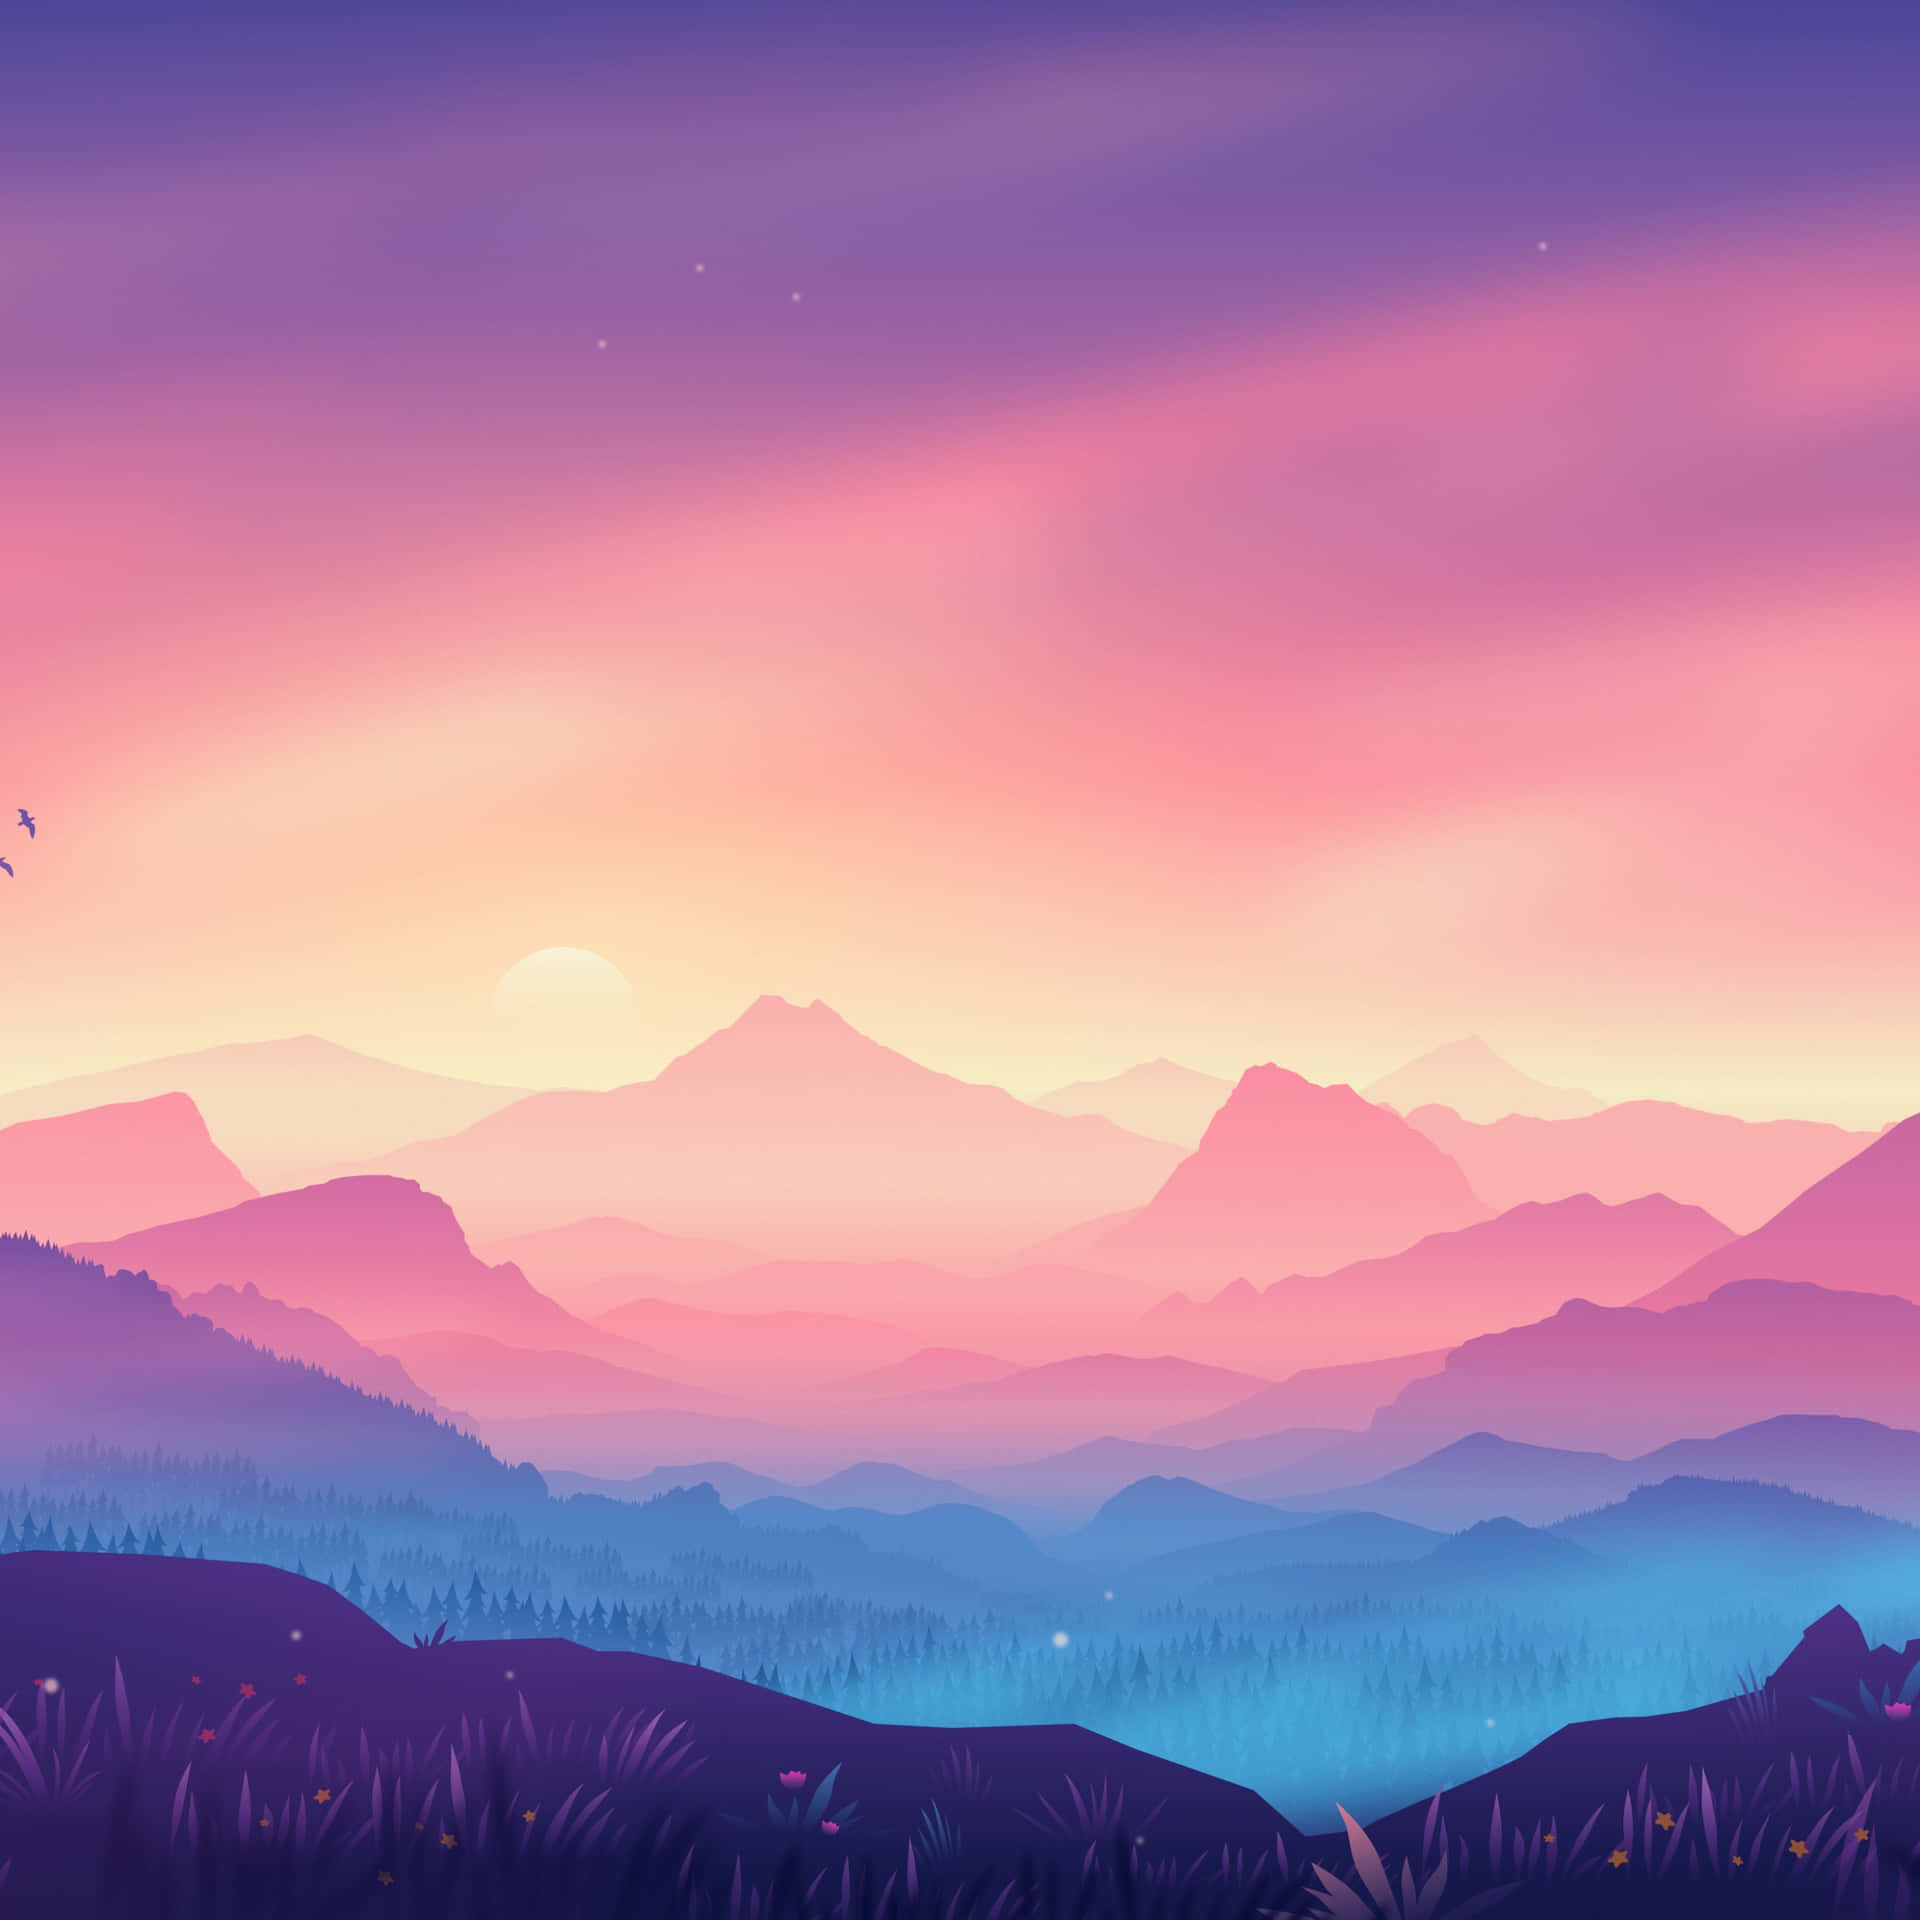 A Colorful Landscape With Mountains And Birds Background